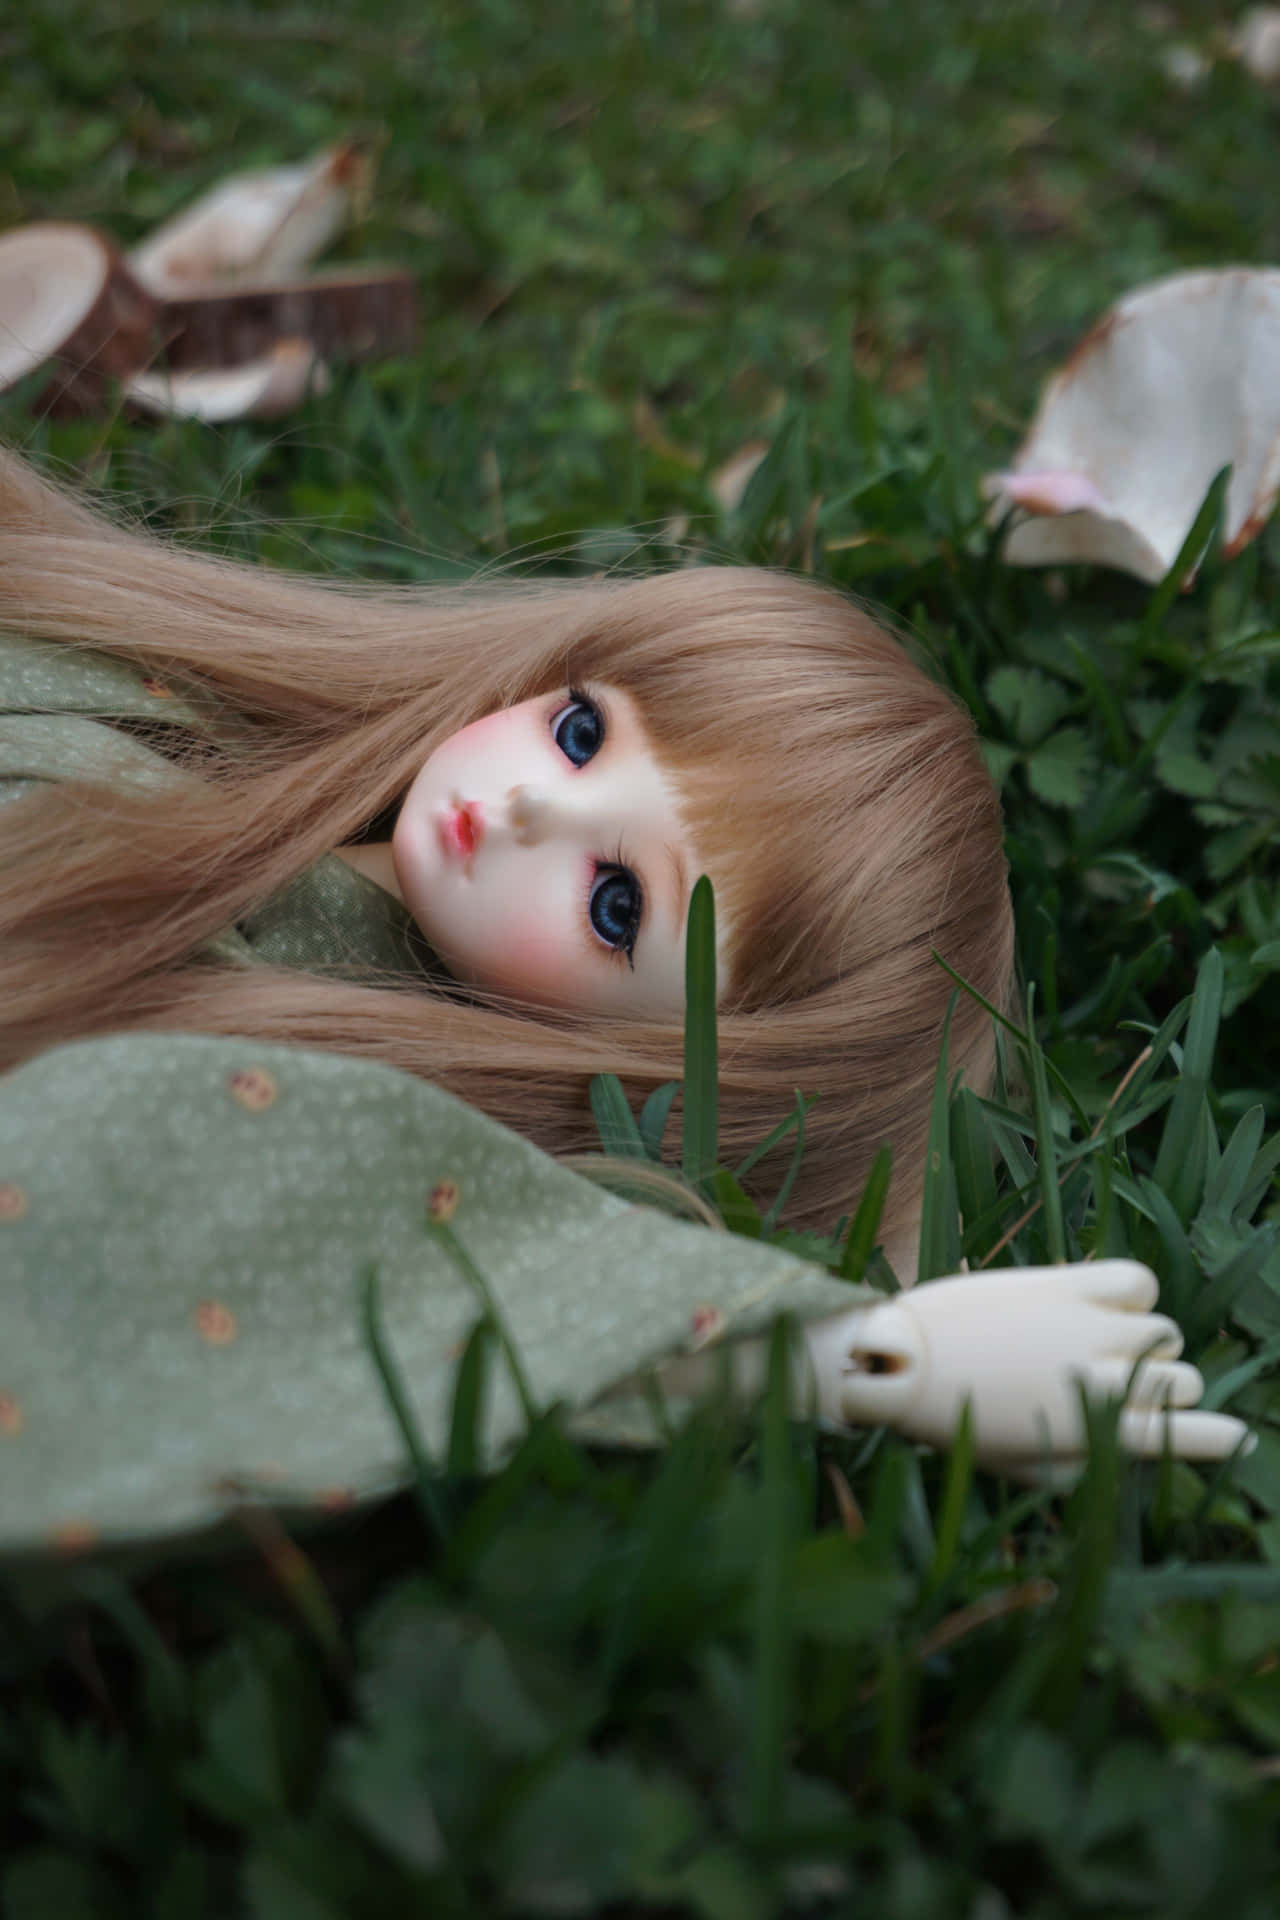 Doll Is Lying On The Grass